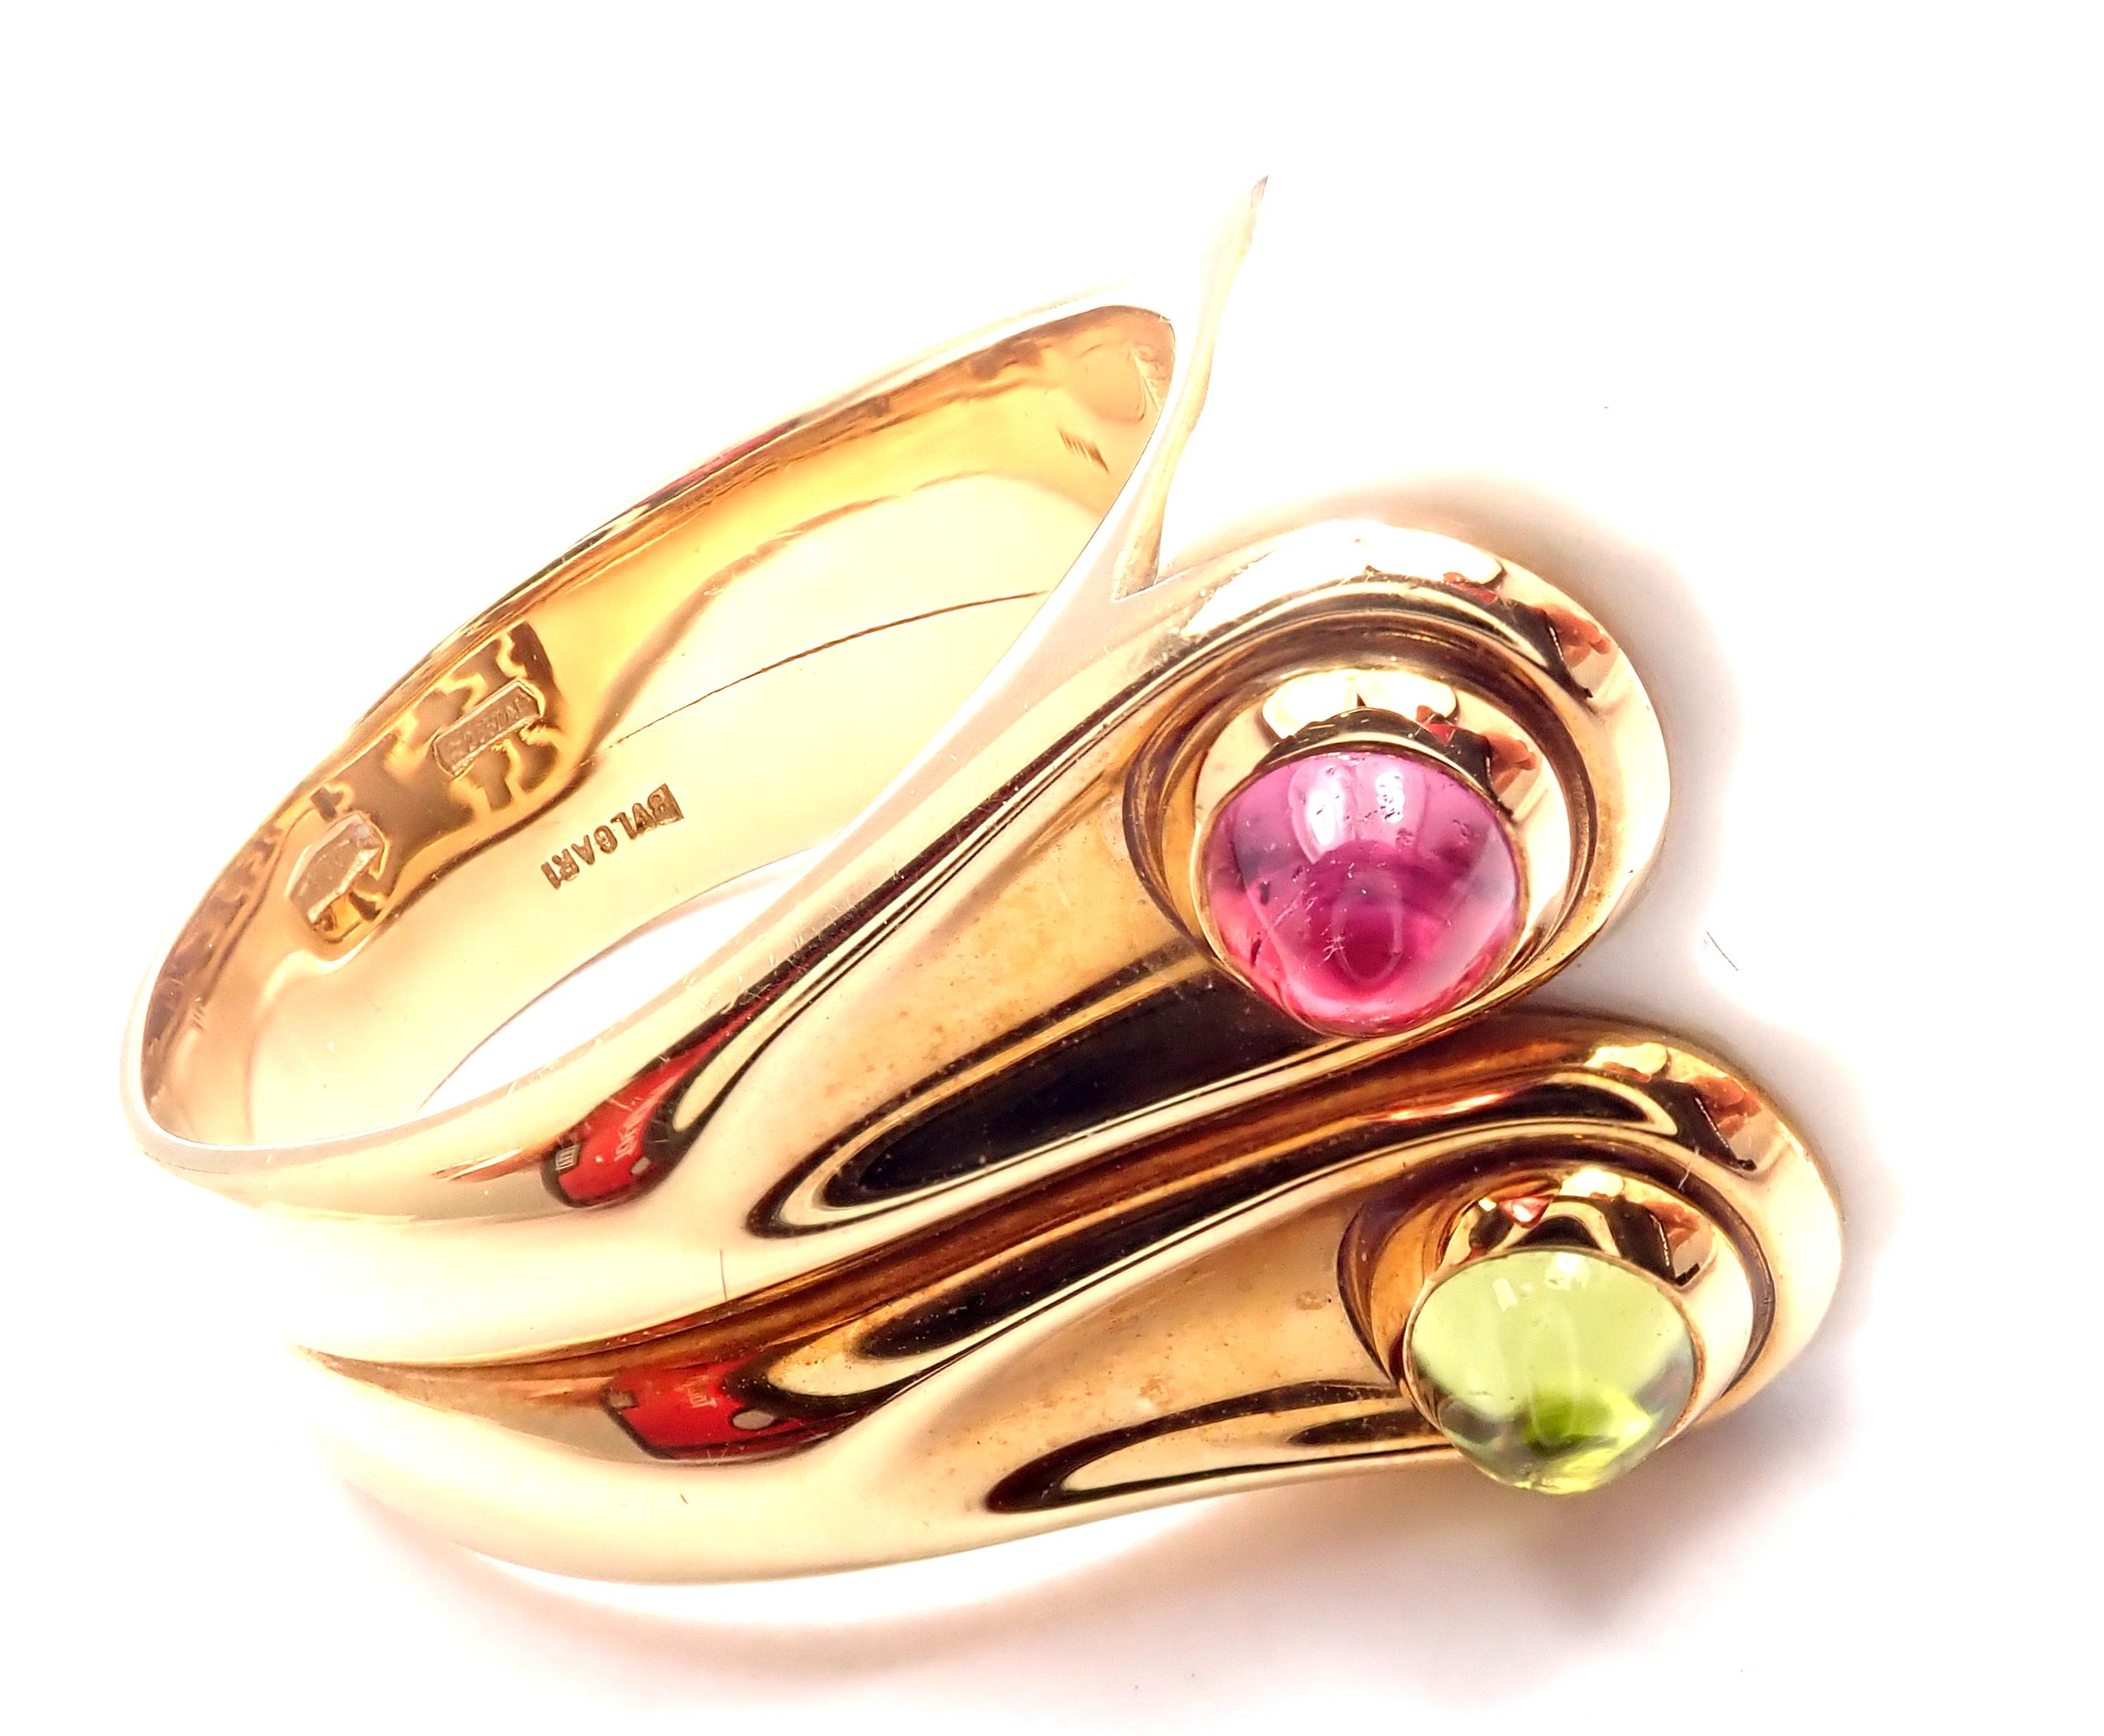 18k Yellow Gold Carved White Ceramic Pink & Green Tourmaline Ring By Bulgari. 
With 2 carved ceramic stones
2 pink & 2 green tourmalines
Details:
Size: 6.5
Weight: 14.8 grams
Width: 16mm
Stamped Hallmarks: Bvlgari 750
*Free Shipping within the